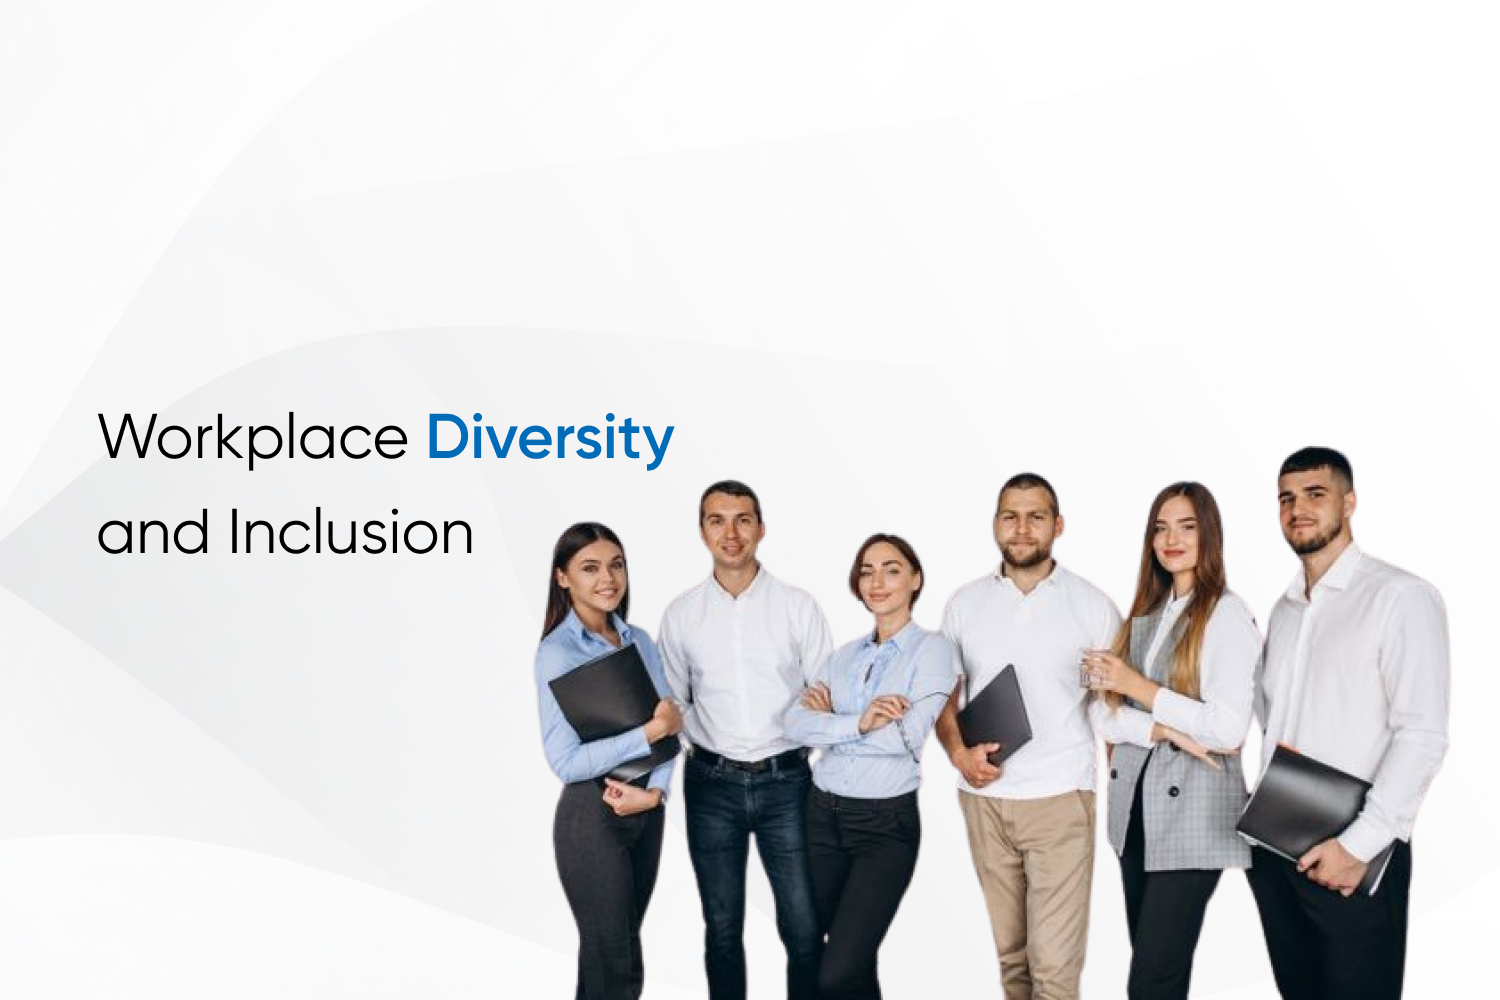 Workplace Diversity and Inclusion